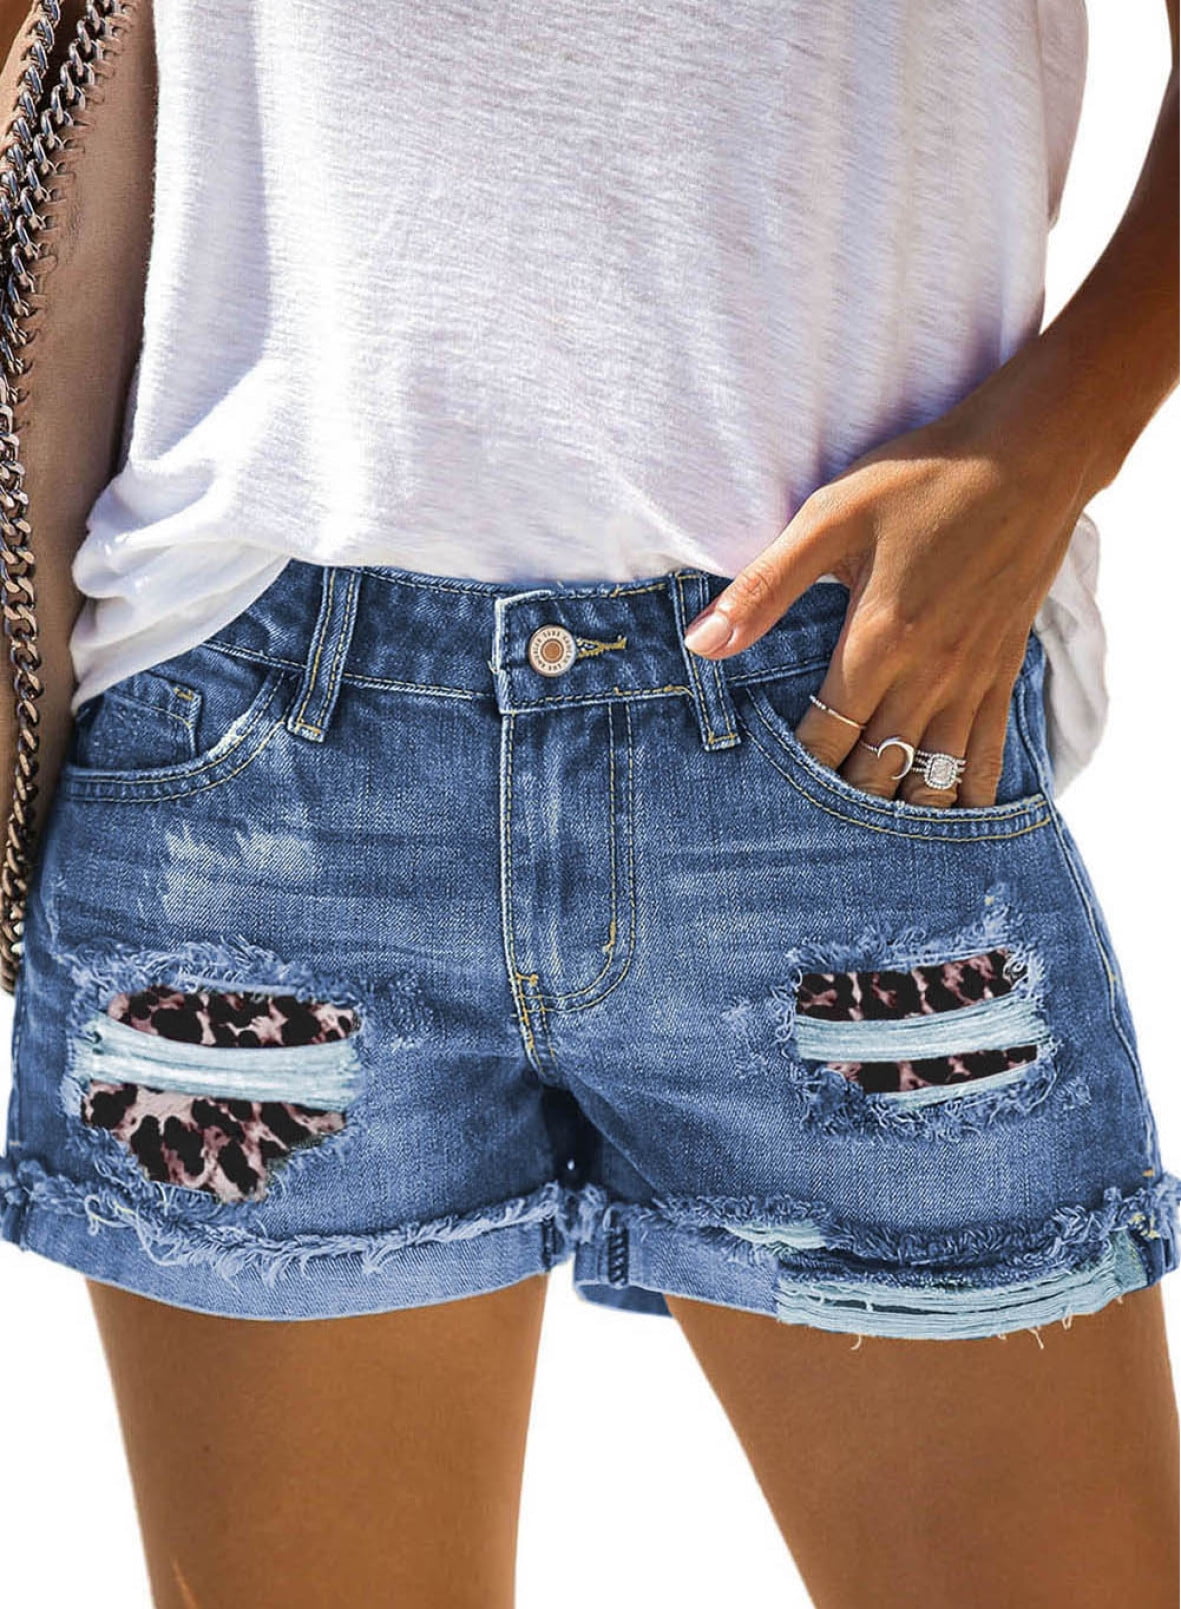 Women's Stretchy High Waisted Denim Shorts Ripped Rolled Distressed Hot Shorts Running Shorts for Women Jean Shorts for Women Denim